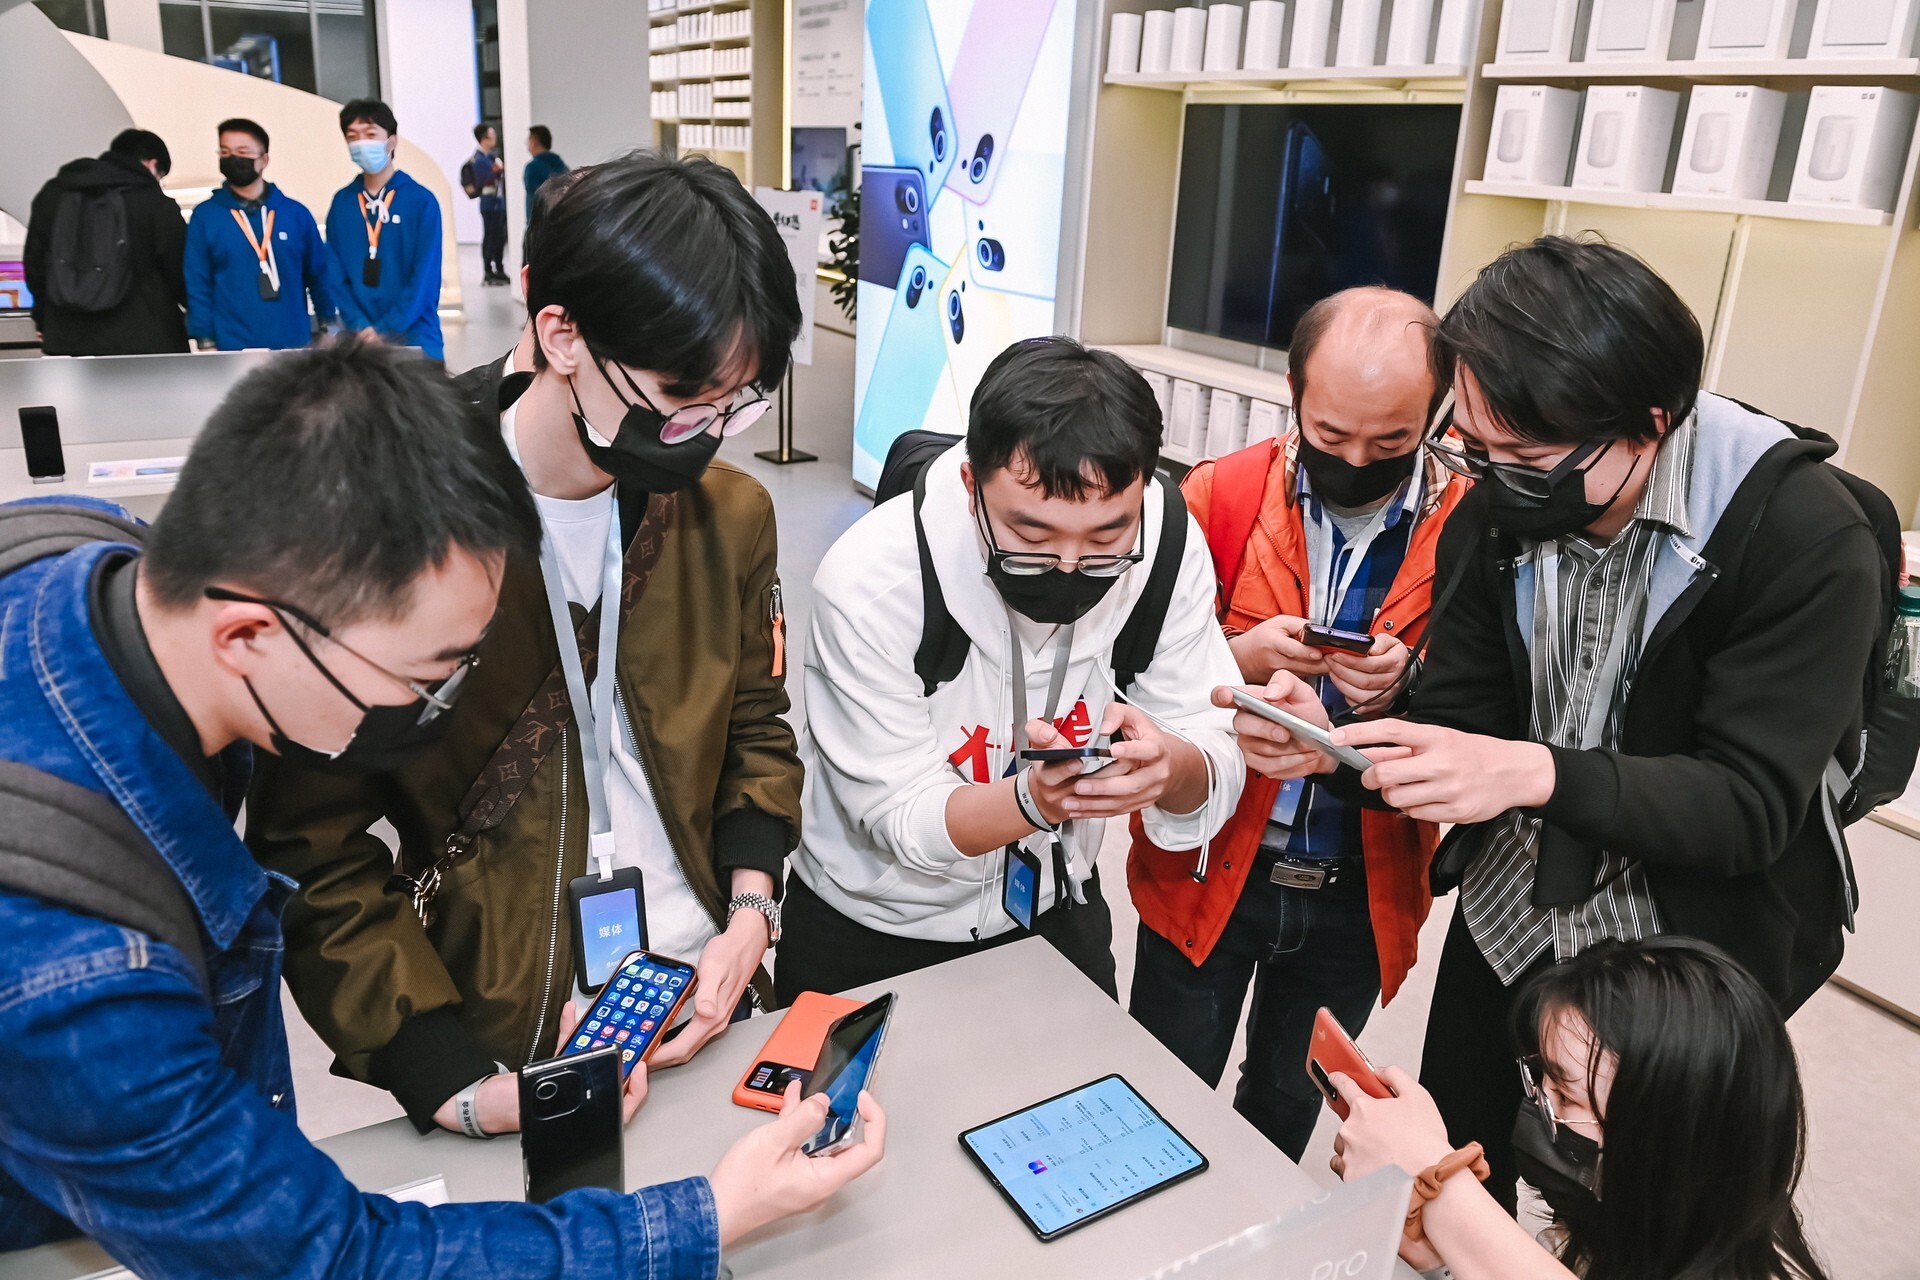 Xiaomi fans check out the company’s foldable smartphone Mi Mix Fold during a launch event in Beijing in March. Photo: Handout/EPA-EFE